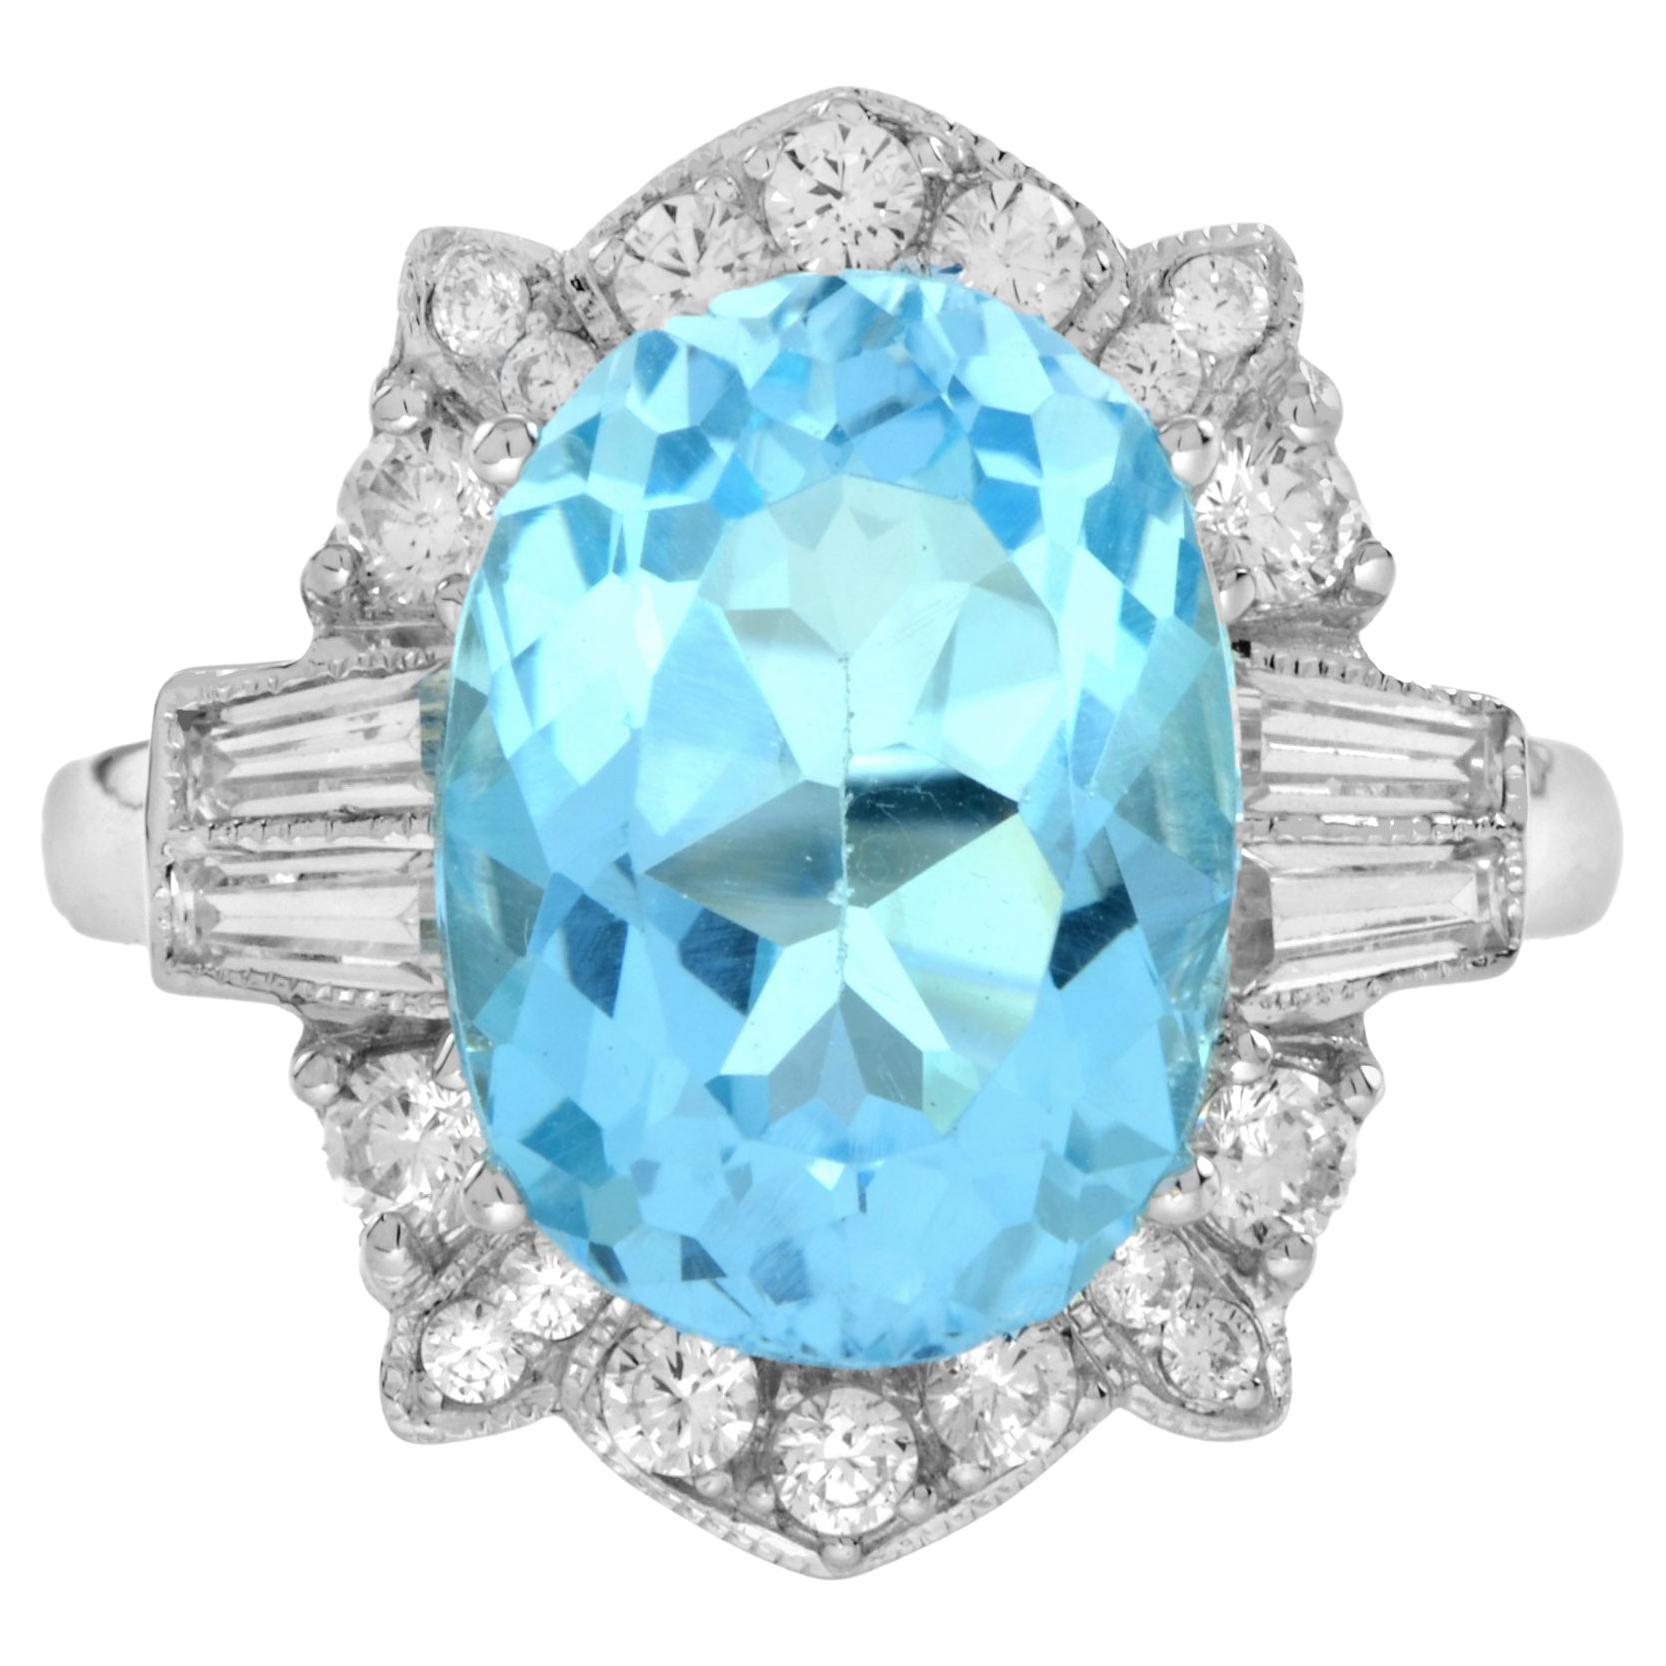 For Sale:  7.25 Ct. Oval Blue Topaz and Diamond Cocktail Ring in 18K White Gold